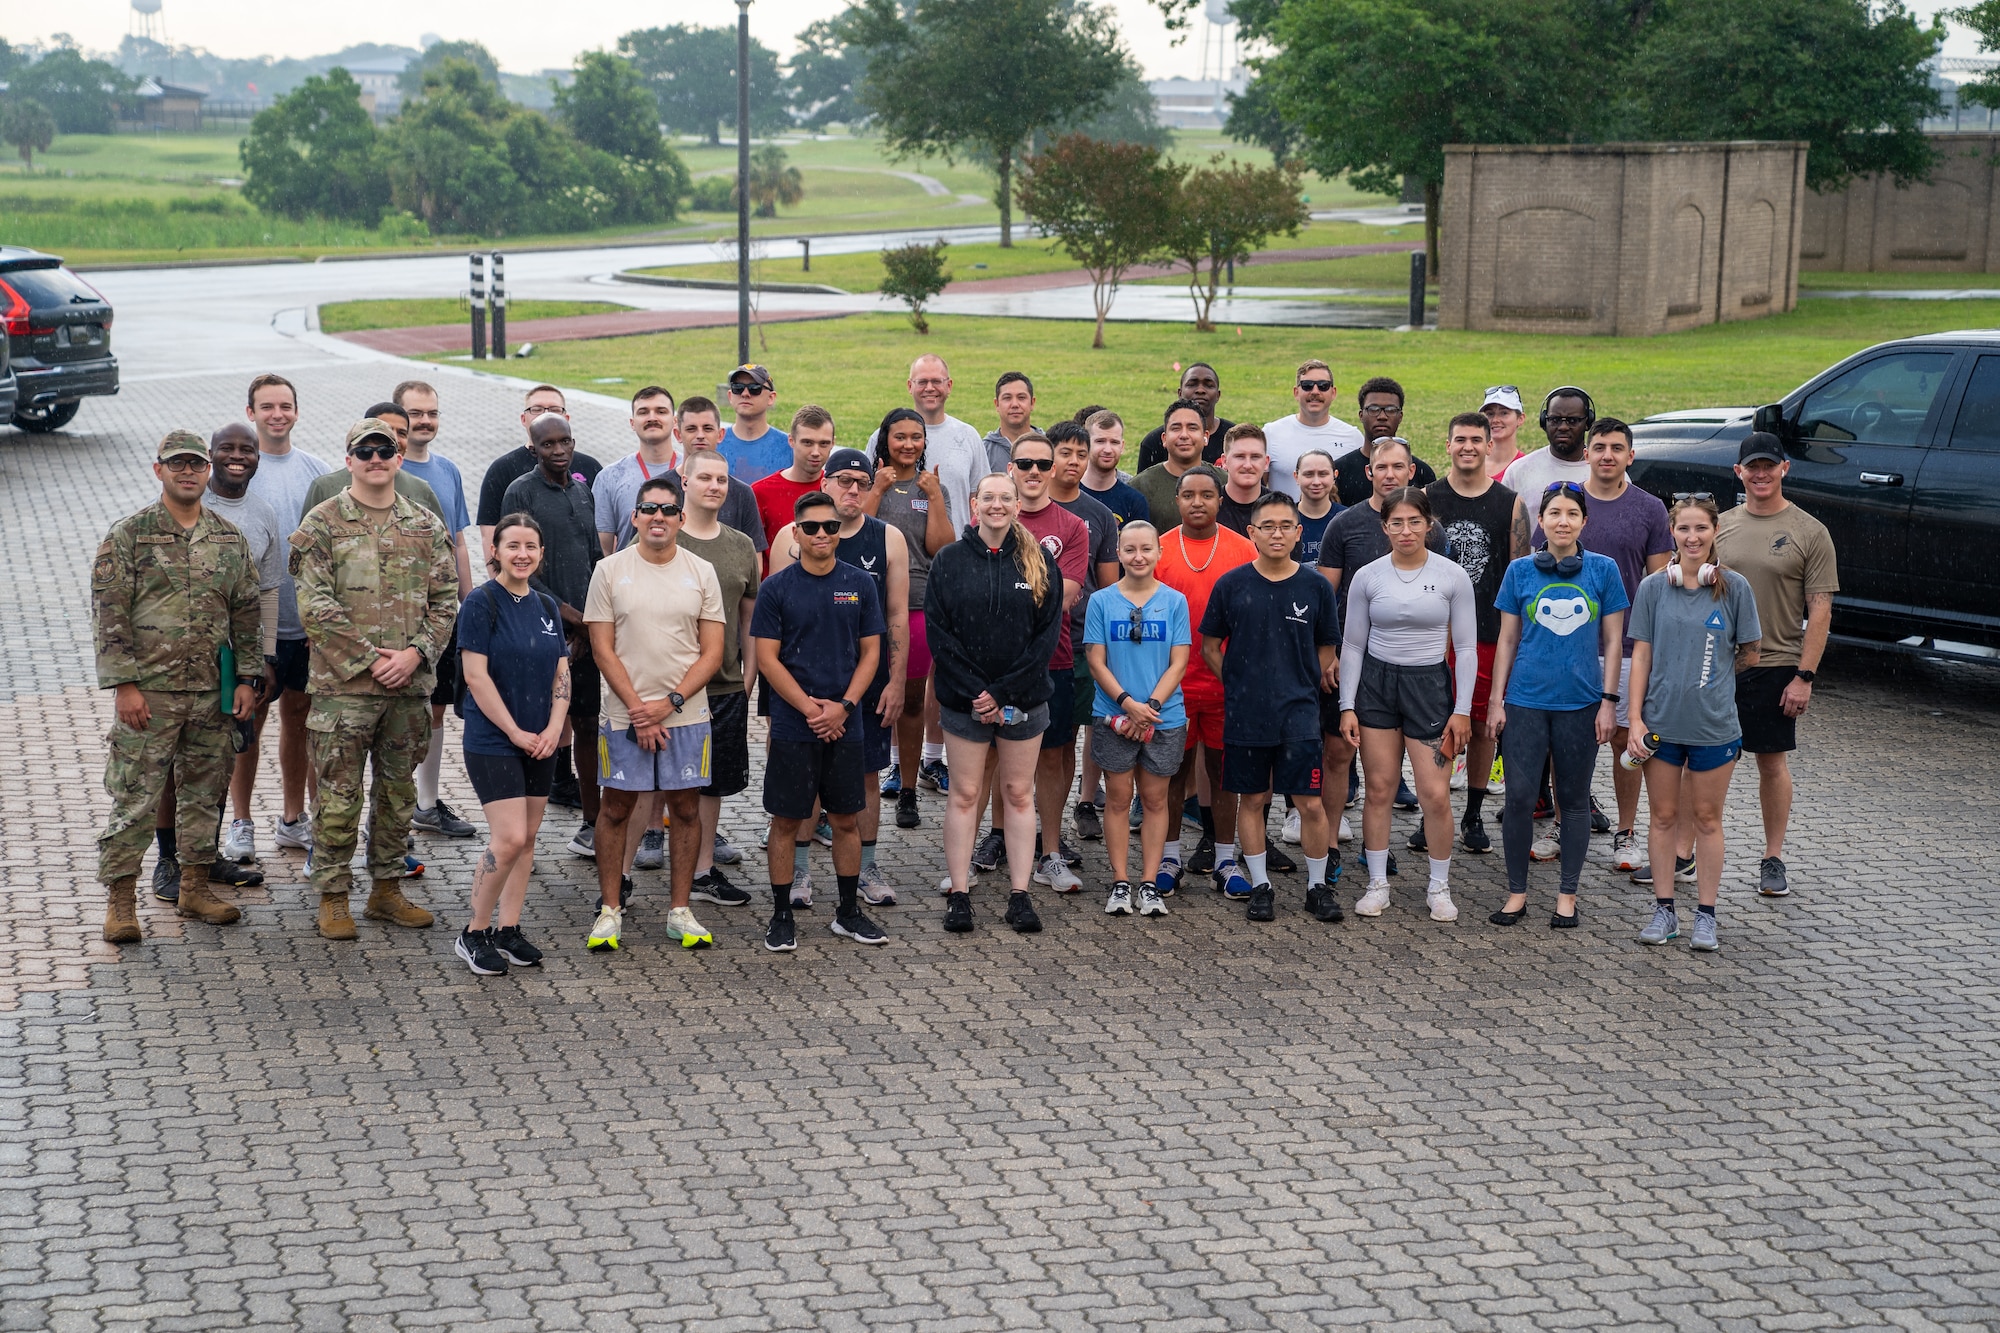 Airmen pose for a group photo before running in the Air Force Assistance Fund 5K at Keesler Air Force Base, Mississippi, May 19, 2023.